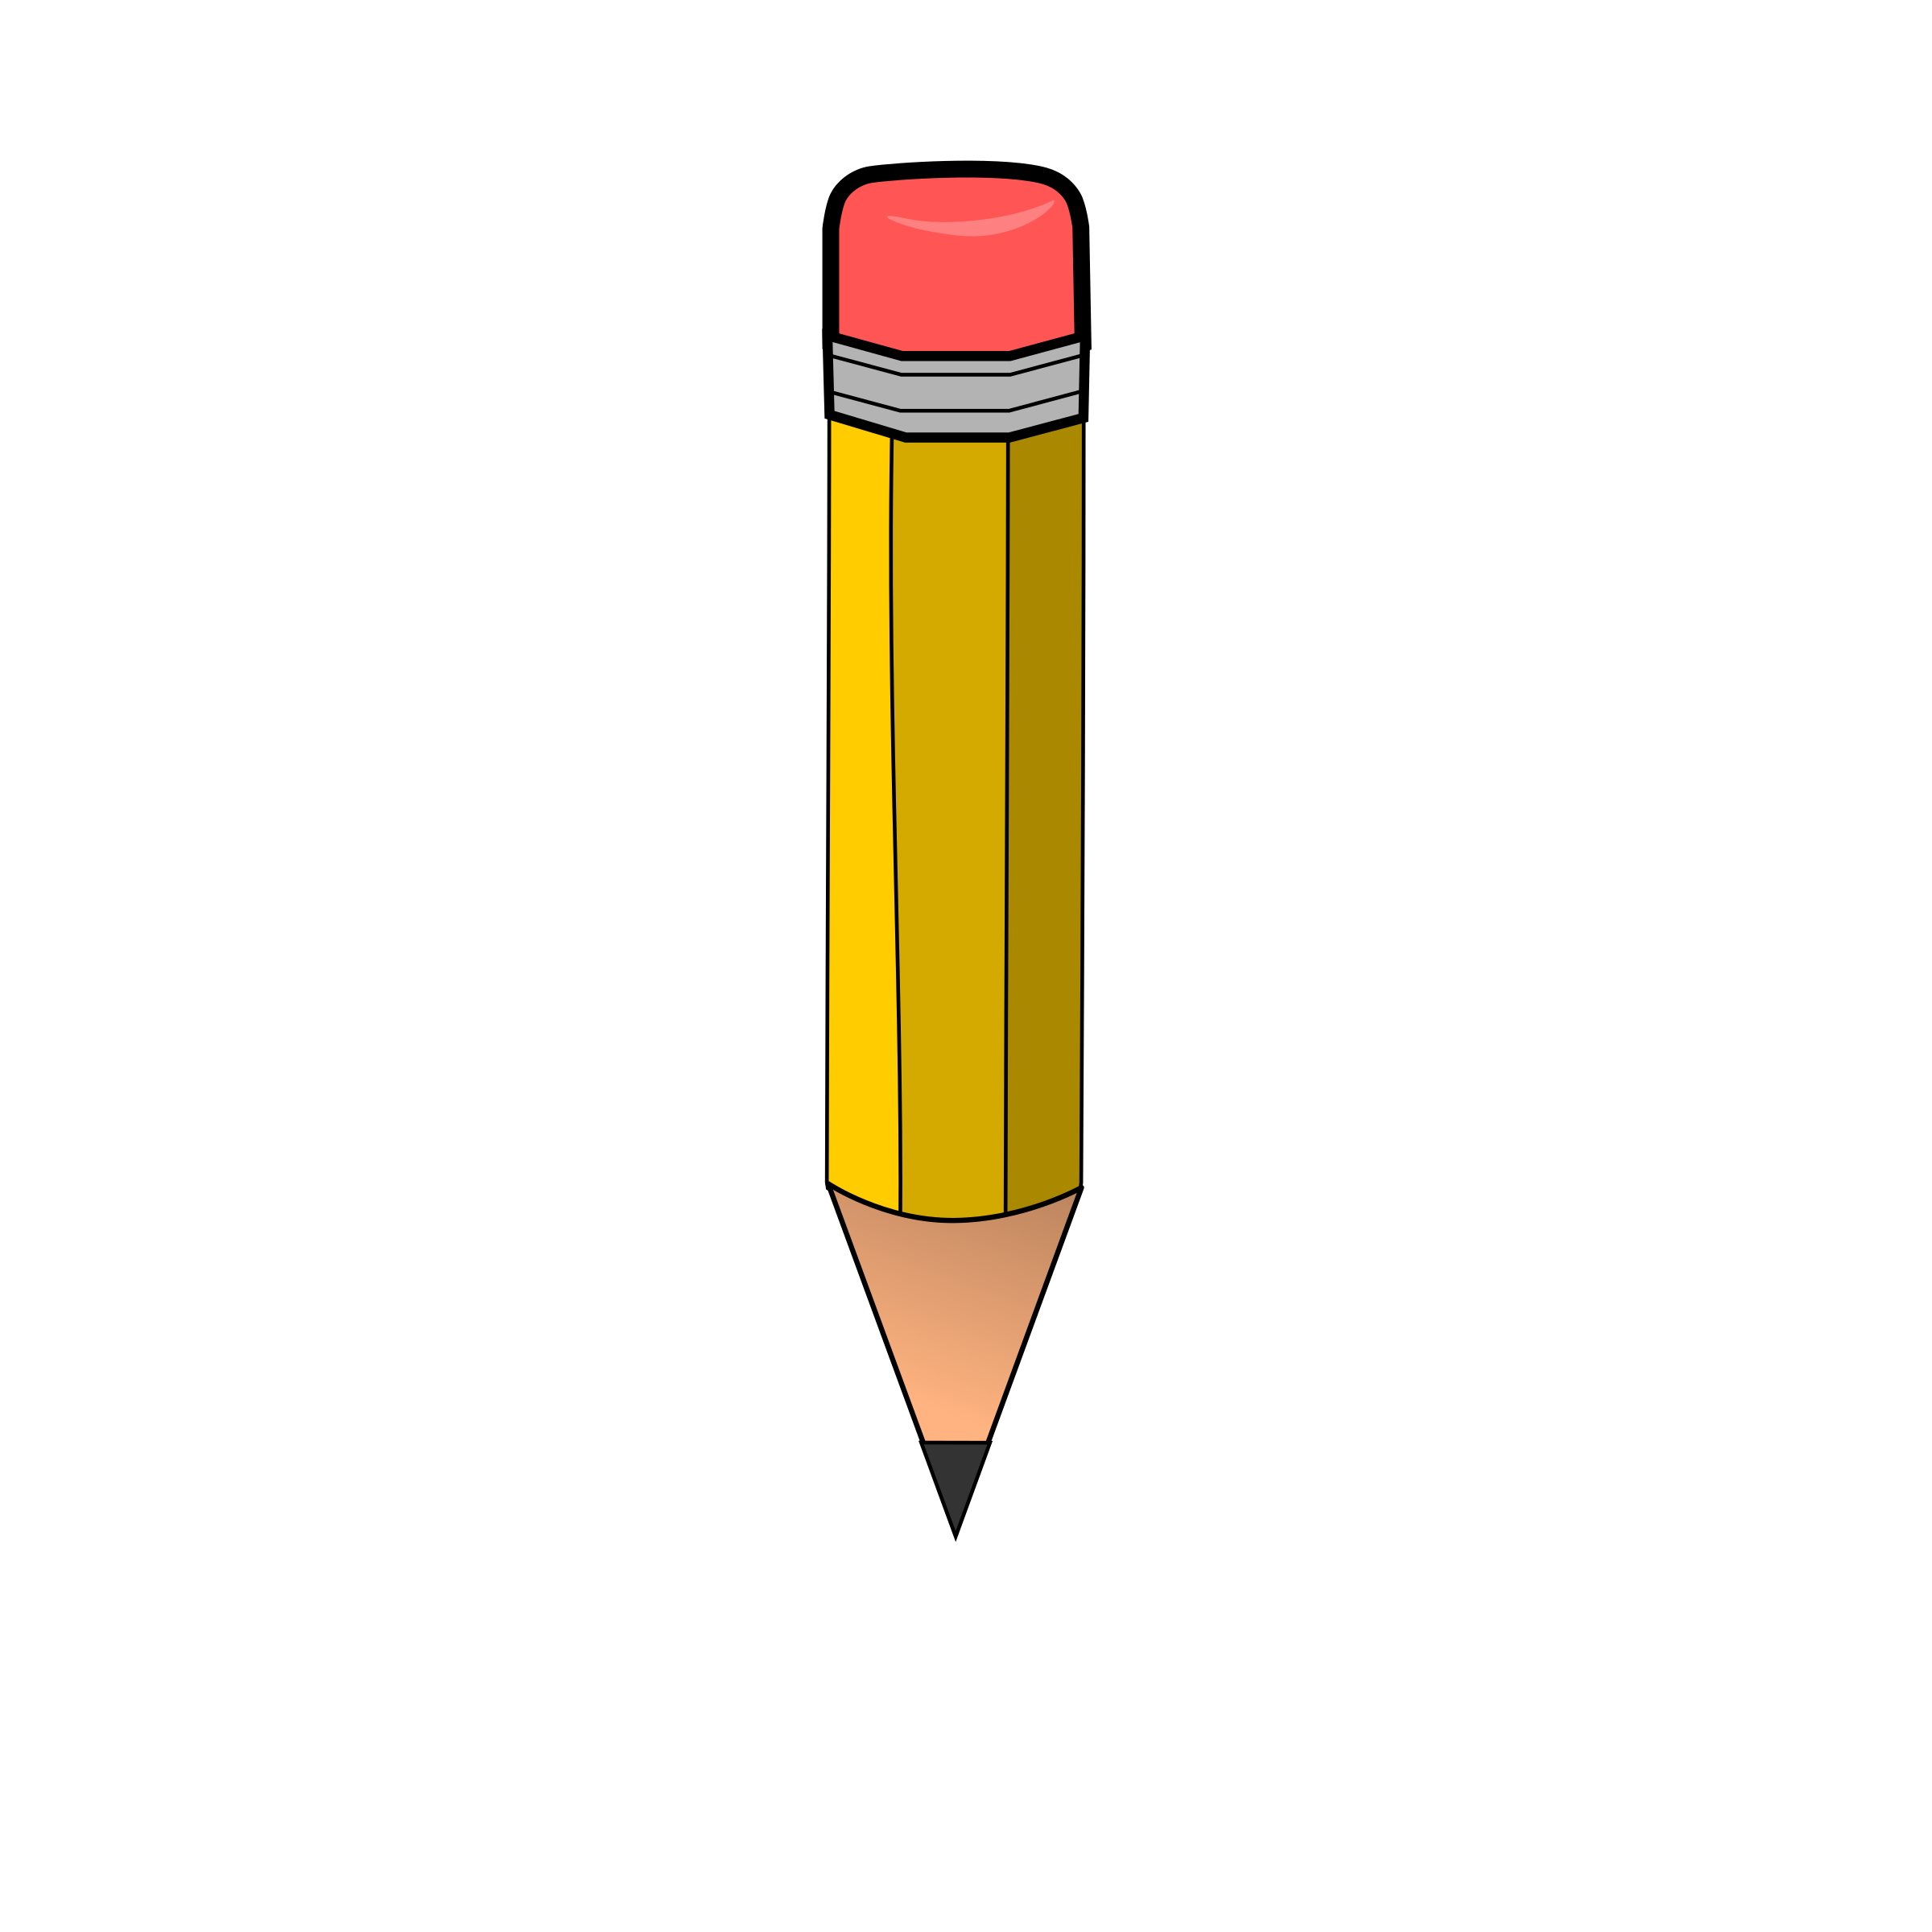 How to use pencil animation - lordkop